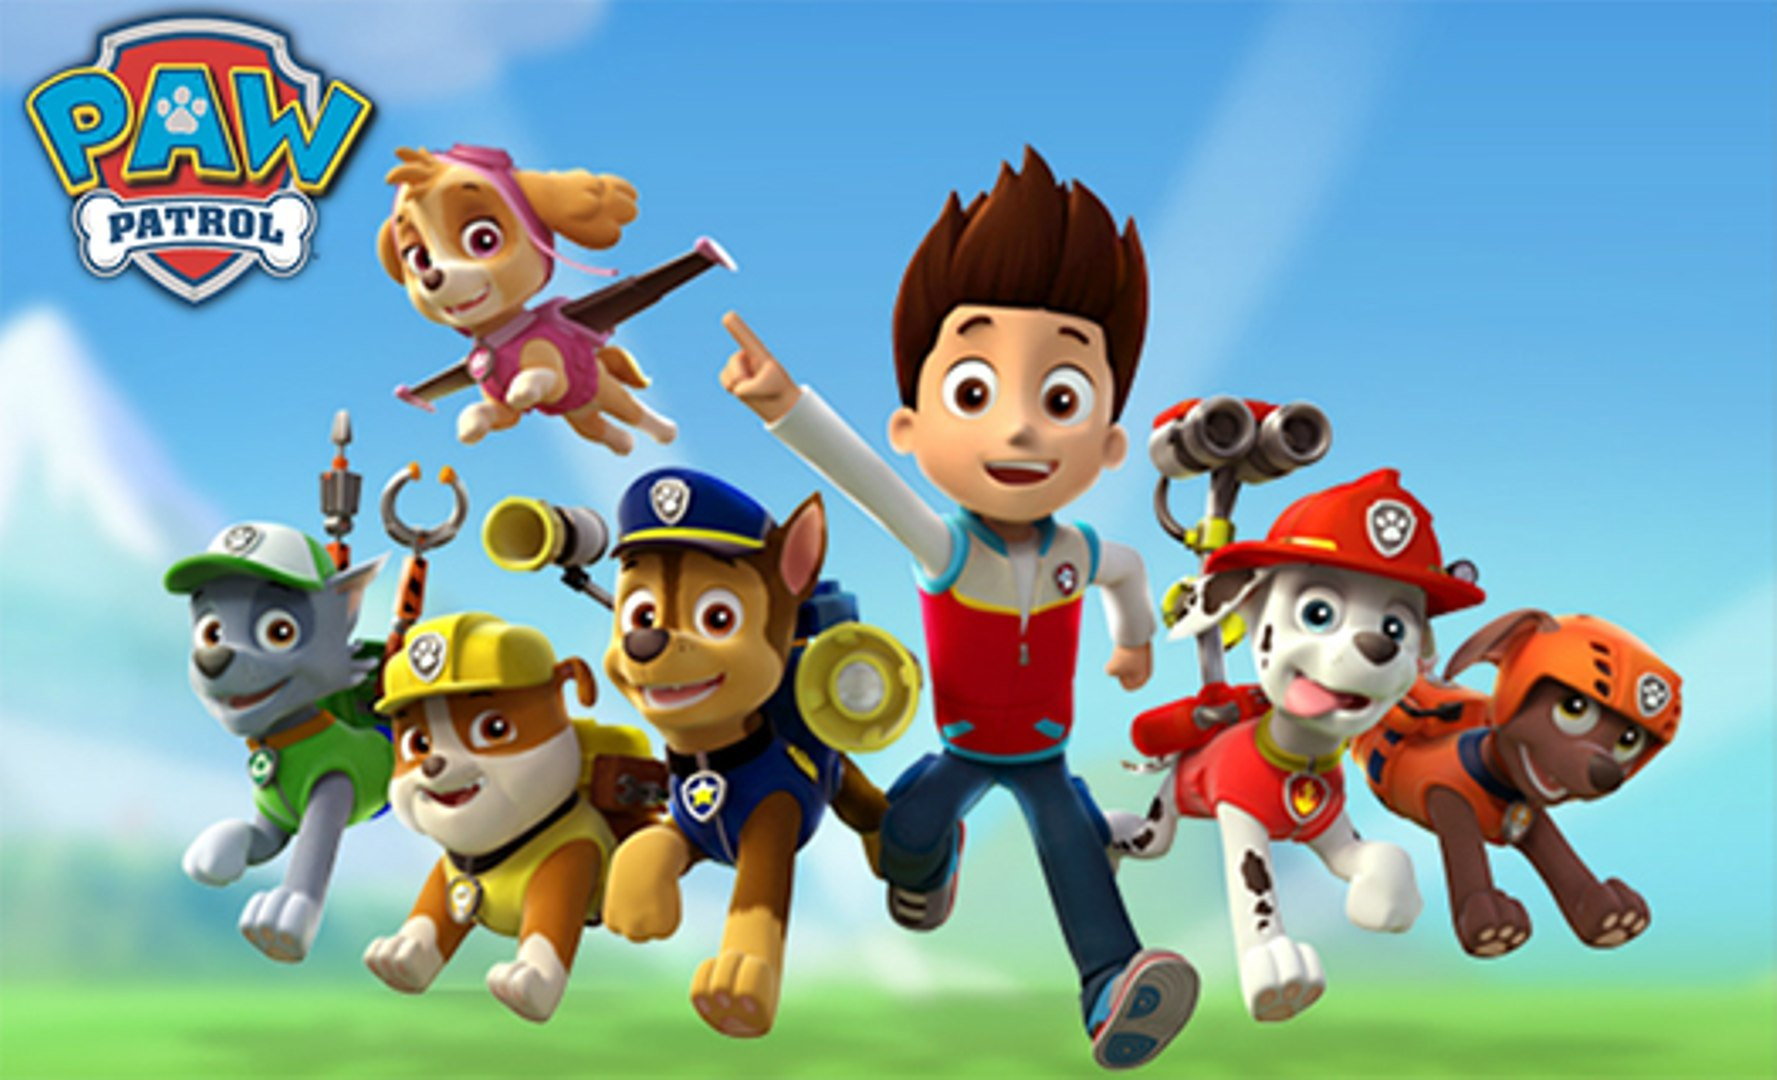 Paw Patrol Toys Play With Ryder Chase Marchall And The Others